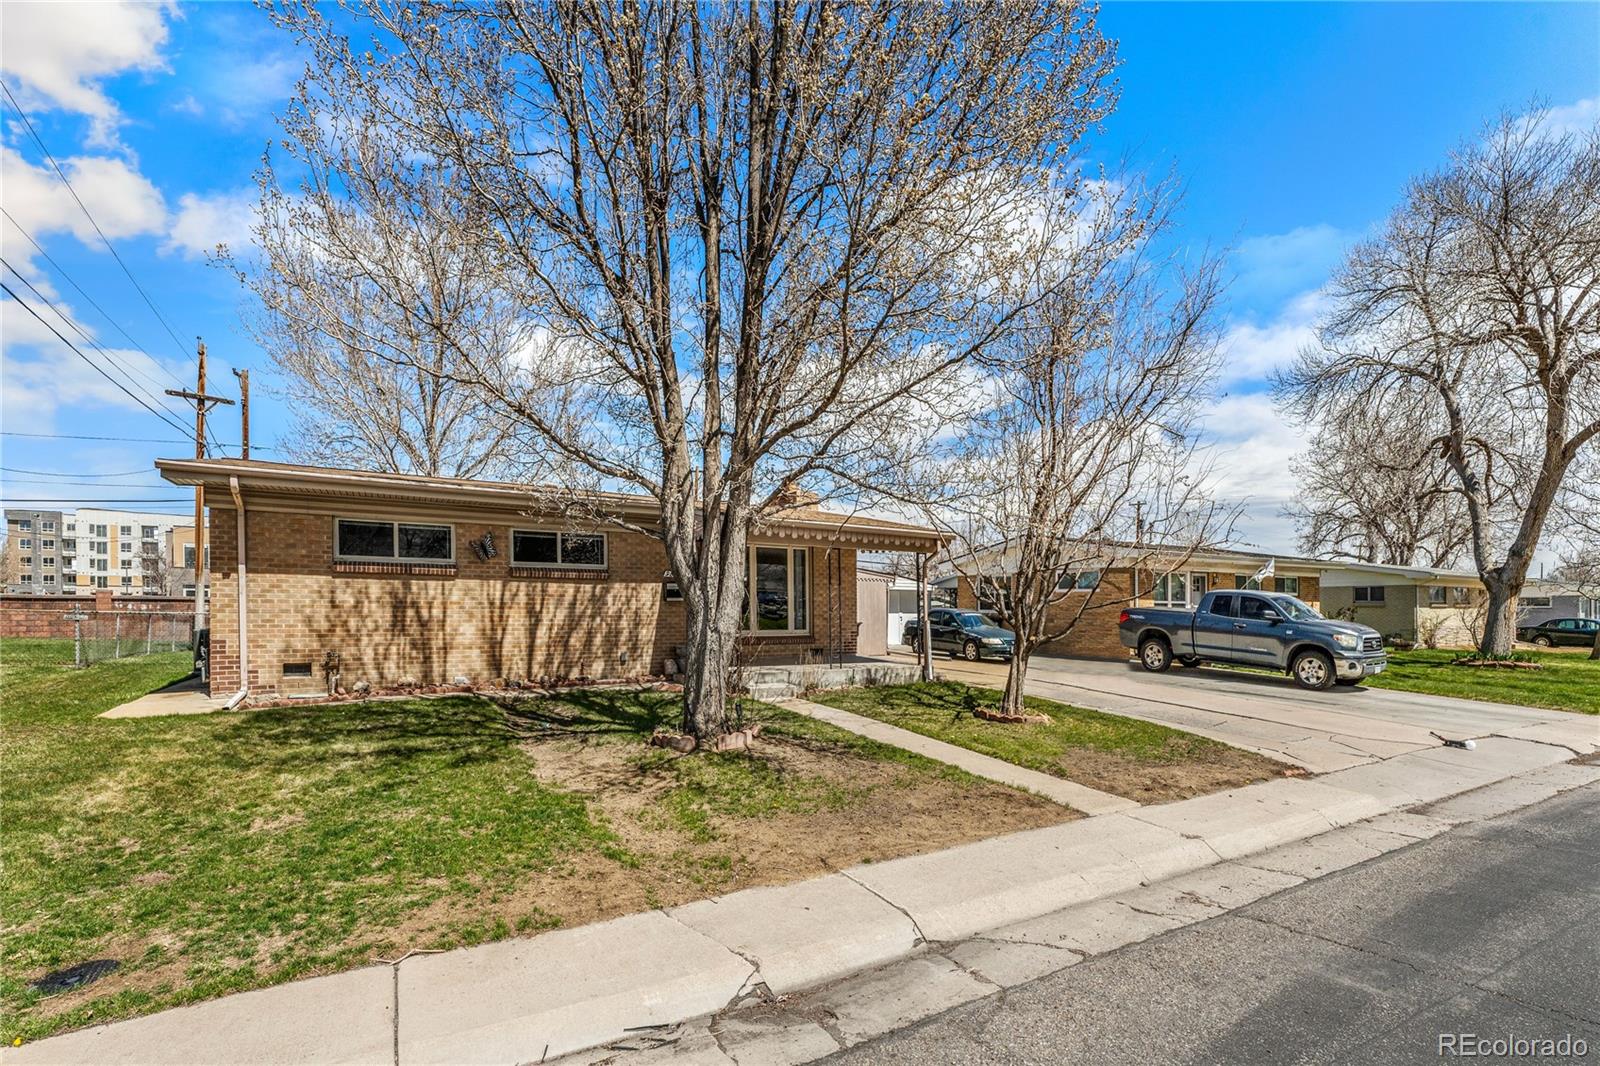 Report Image for 9807 W 57th Place,Arvada, Colorado